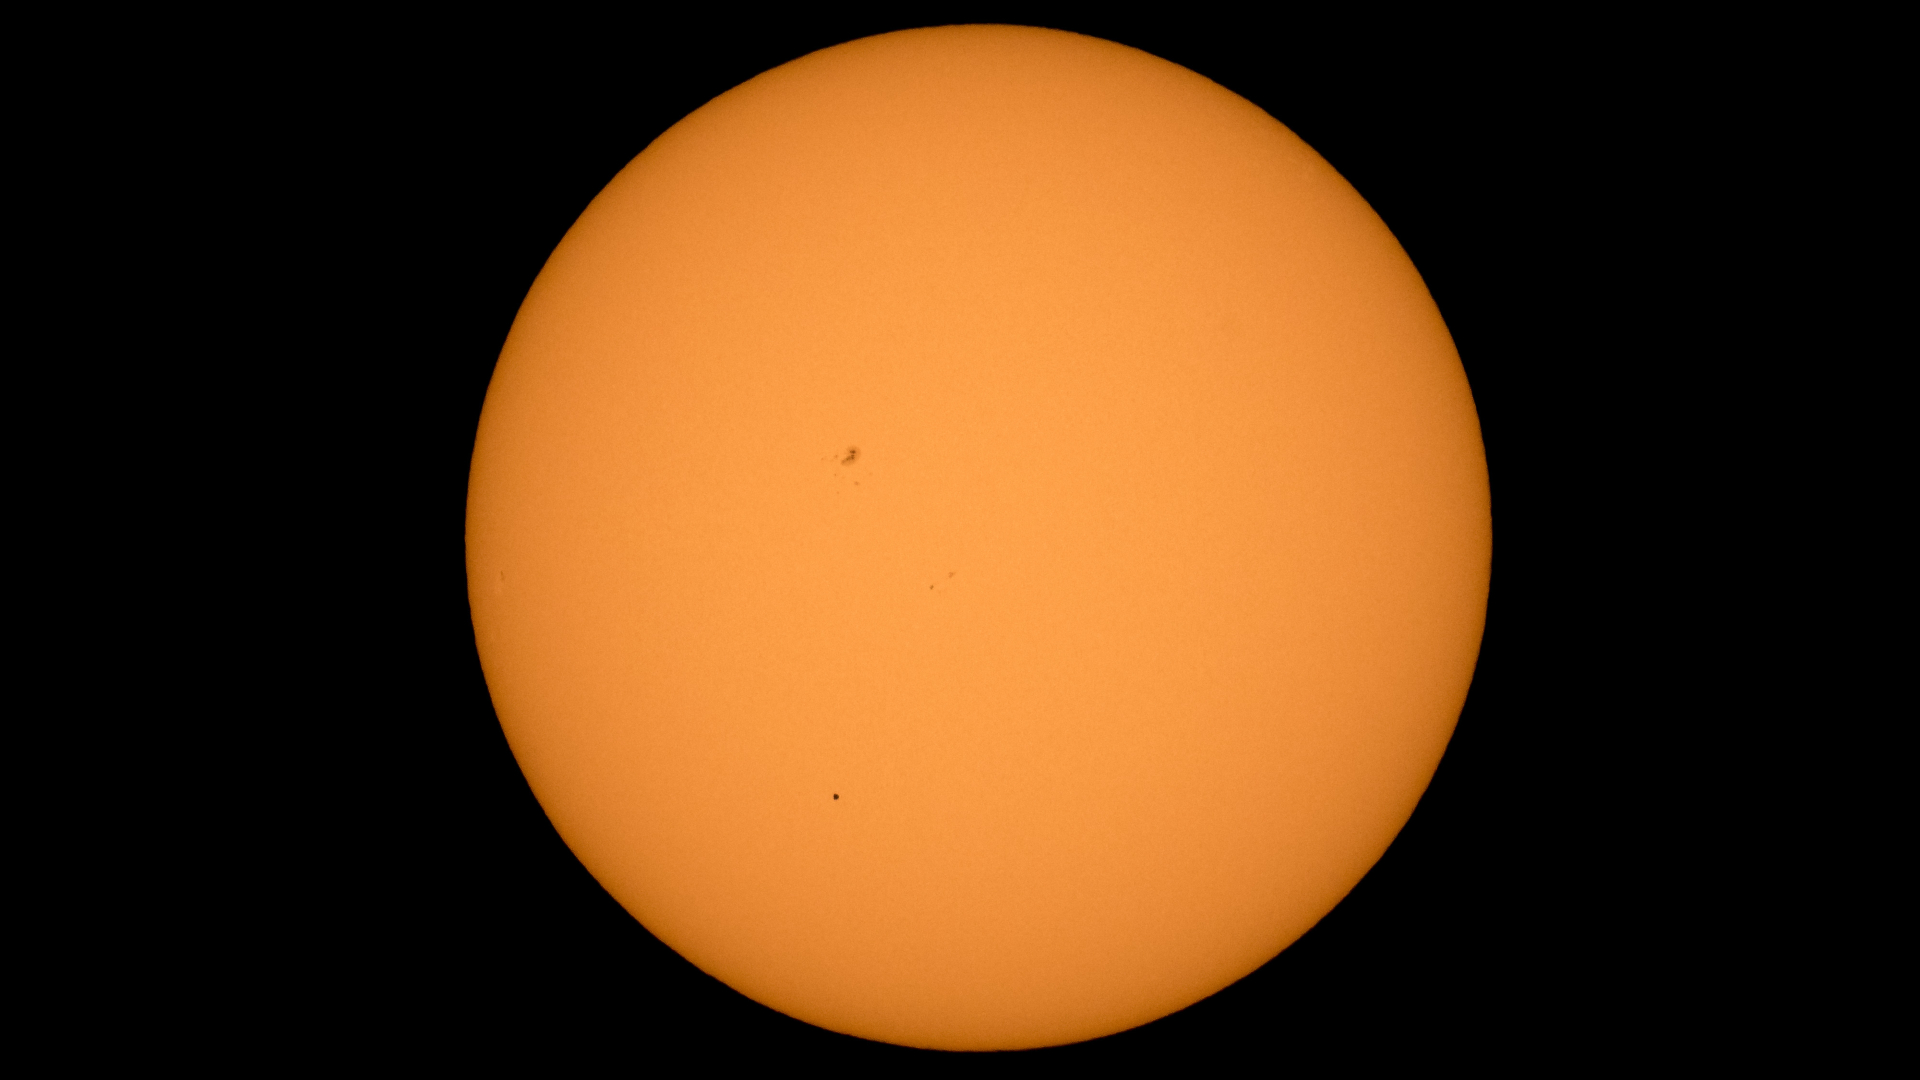 Mercury is photographed passing across the sun in the lower third of the image.